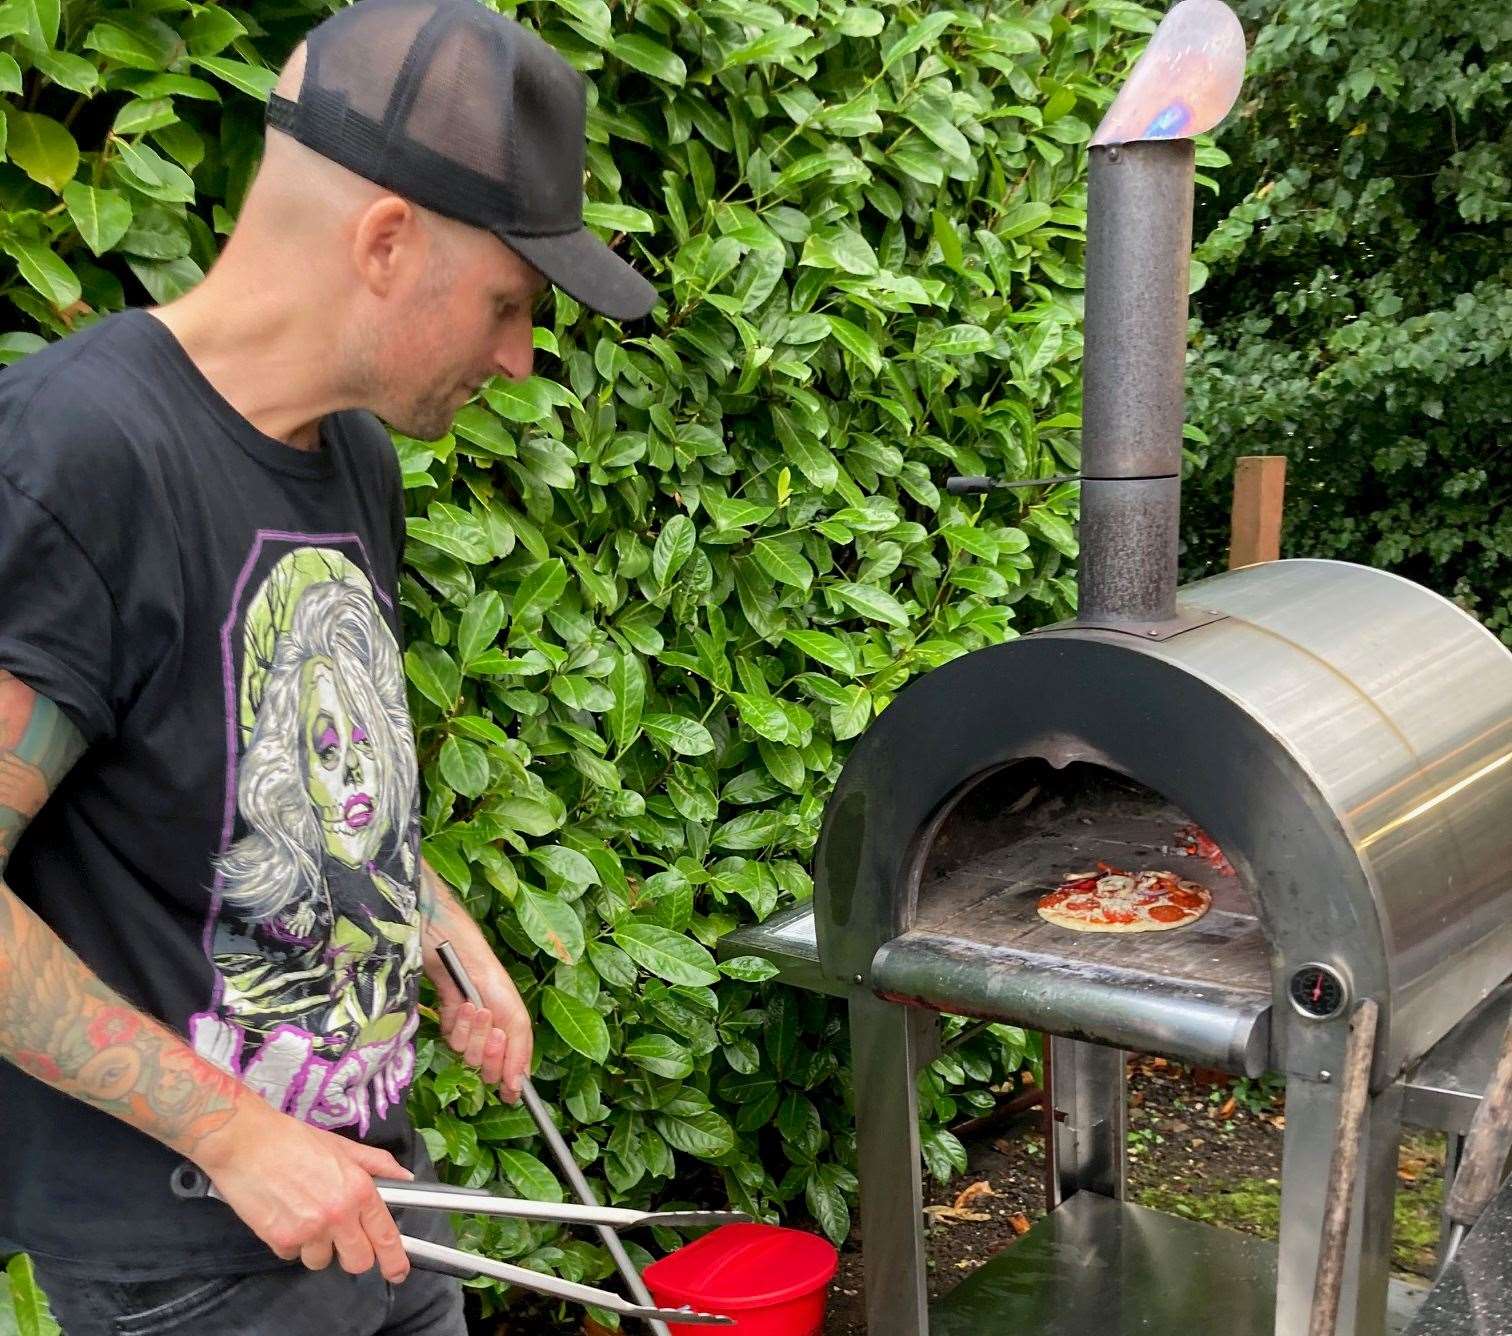 Cooking pizza in the wood-fired oven was a highlight of our stay